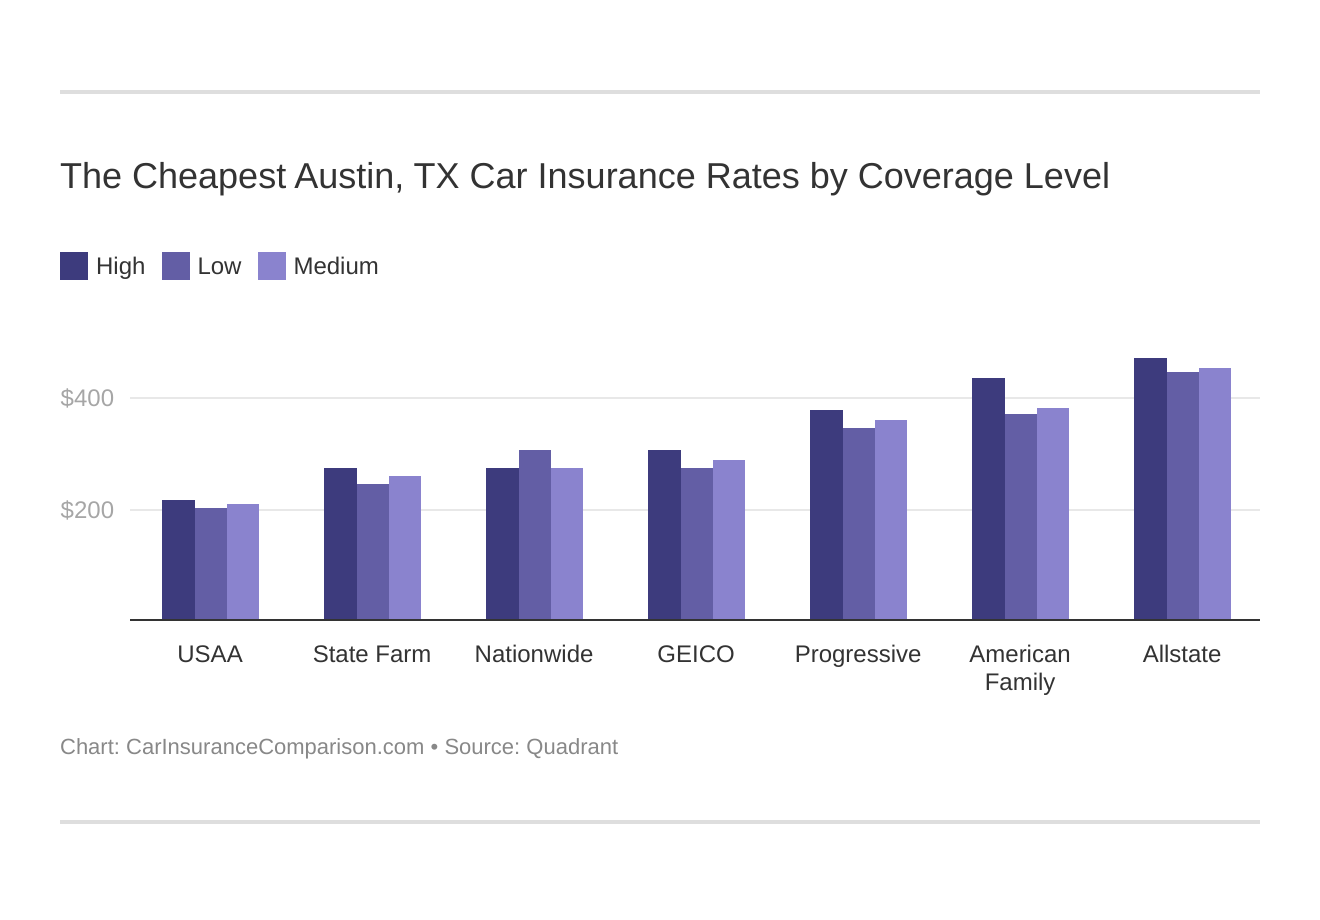 The Cheapest Austin, TX Car Insurance Rates by Coverage Level